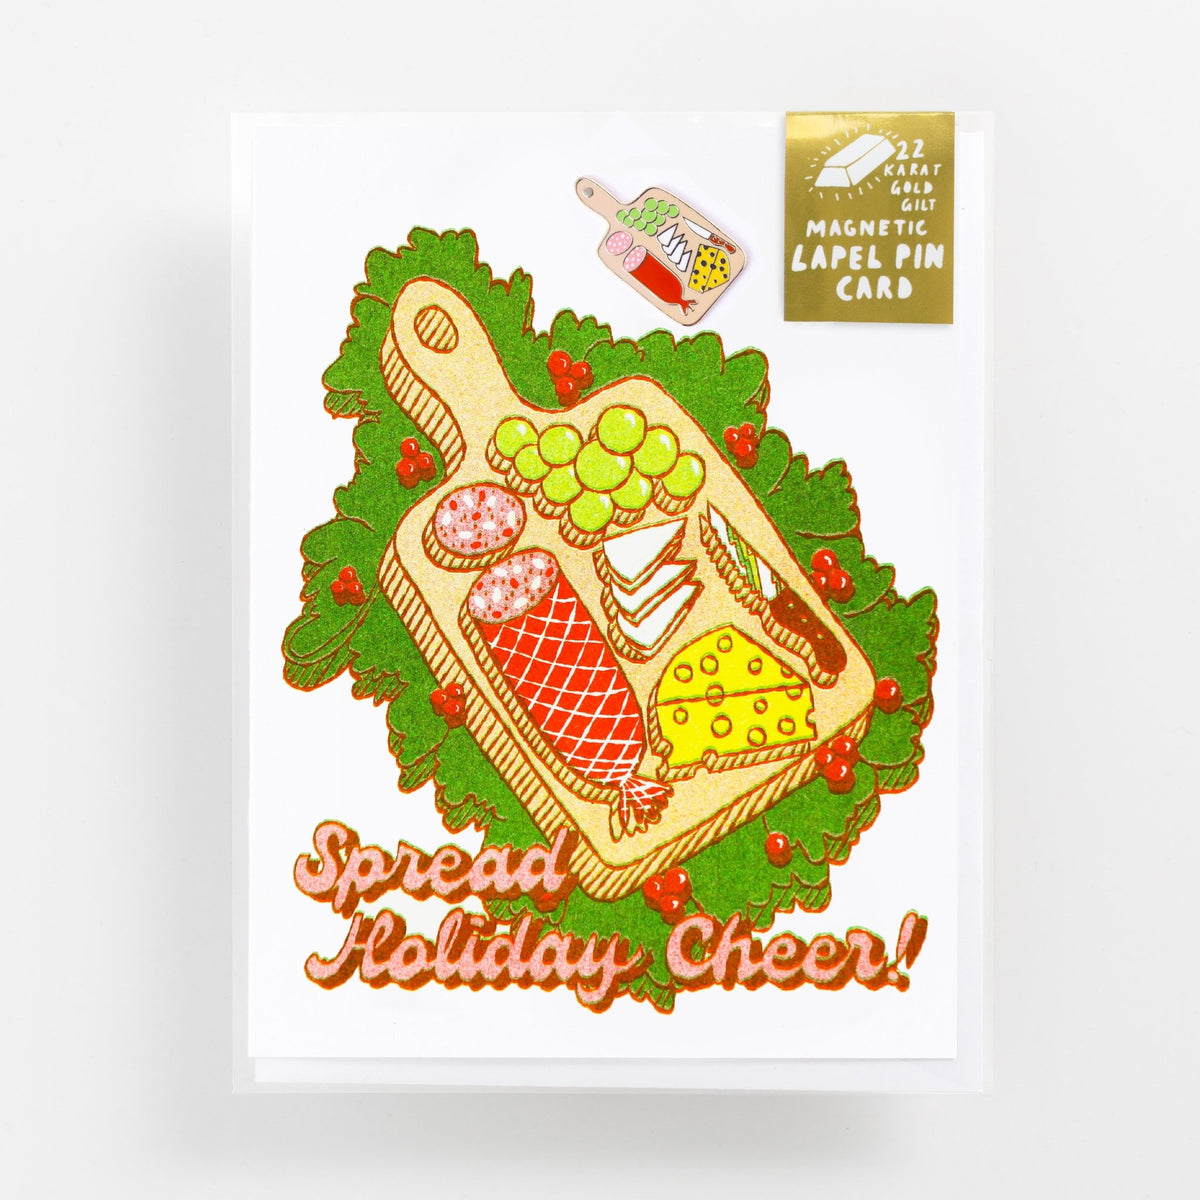 Spread Holiday Cheer - Lapel Pin Card - Yellow Owl Workshop